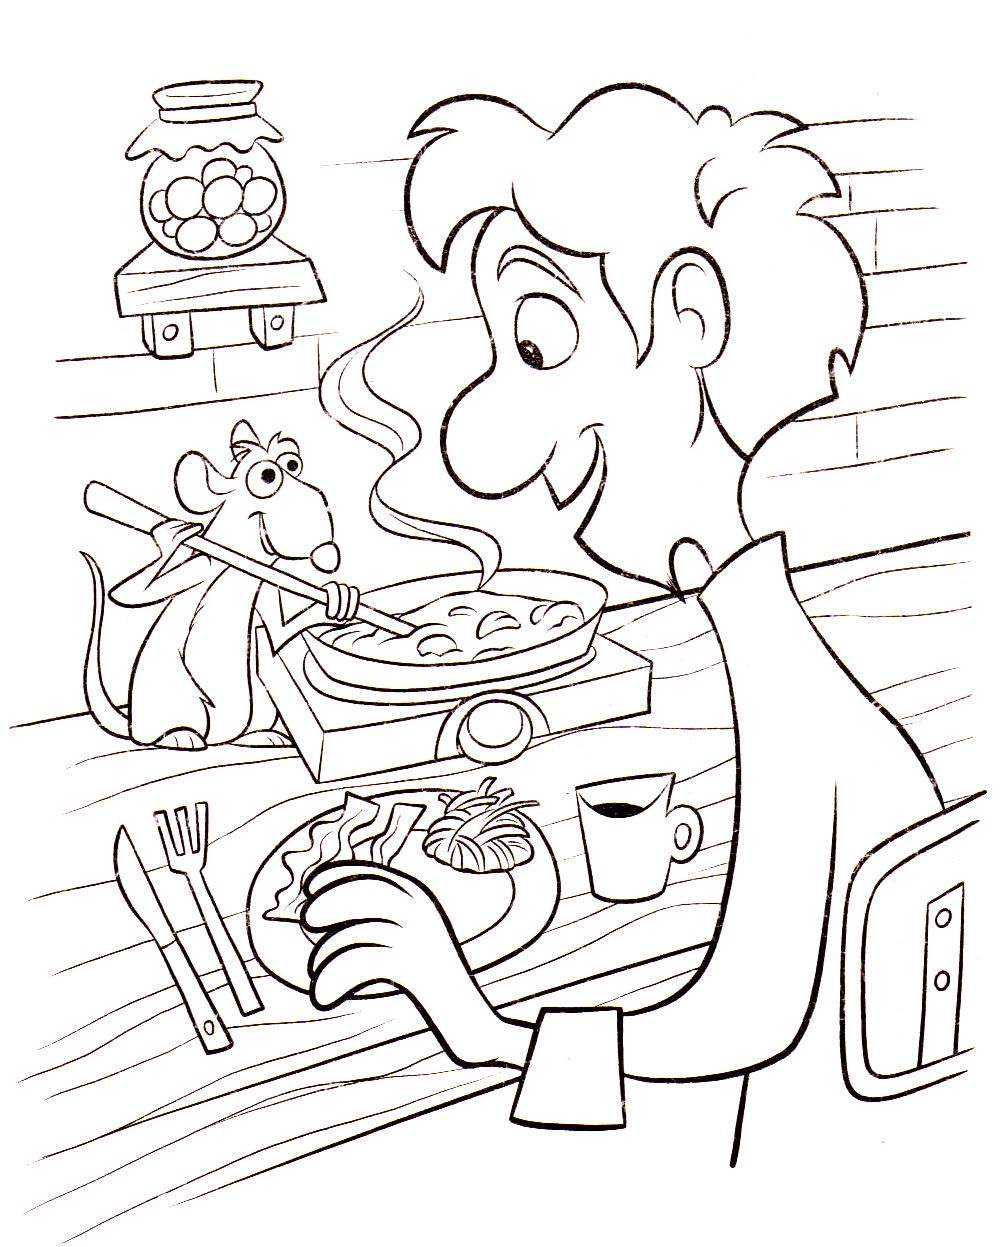 A good meal cooked by Linguini and his friend Rémy the rat